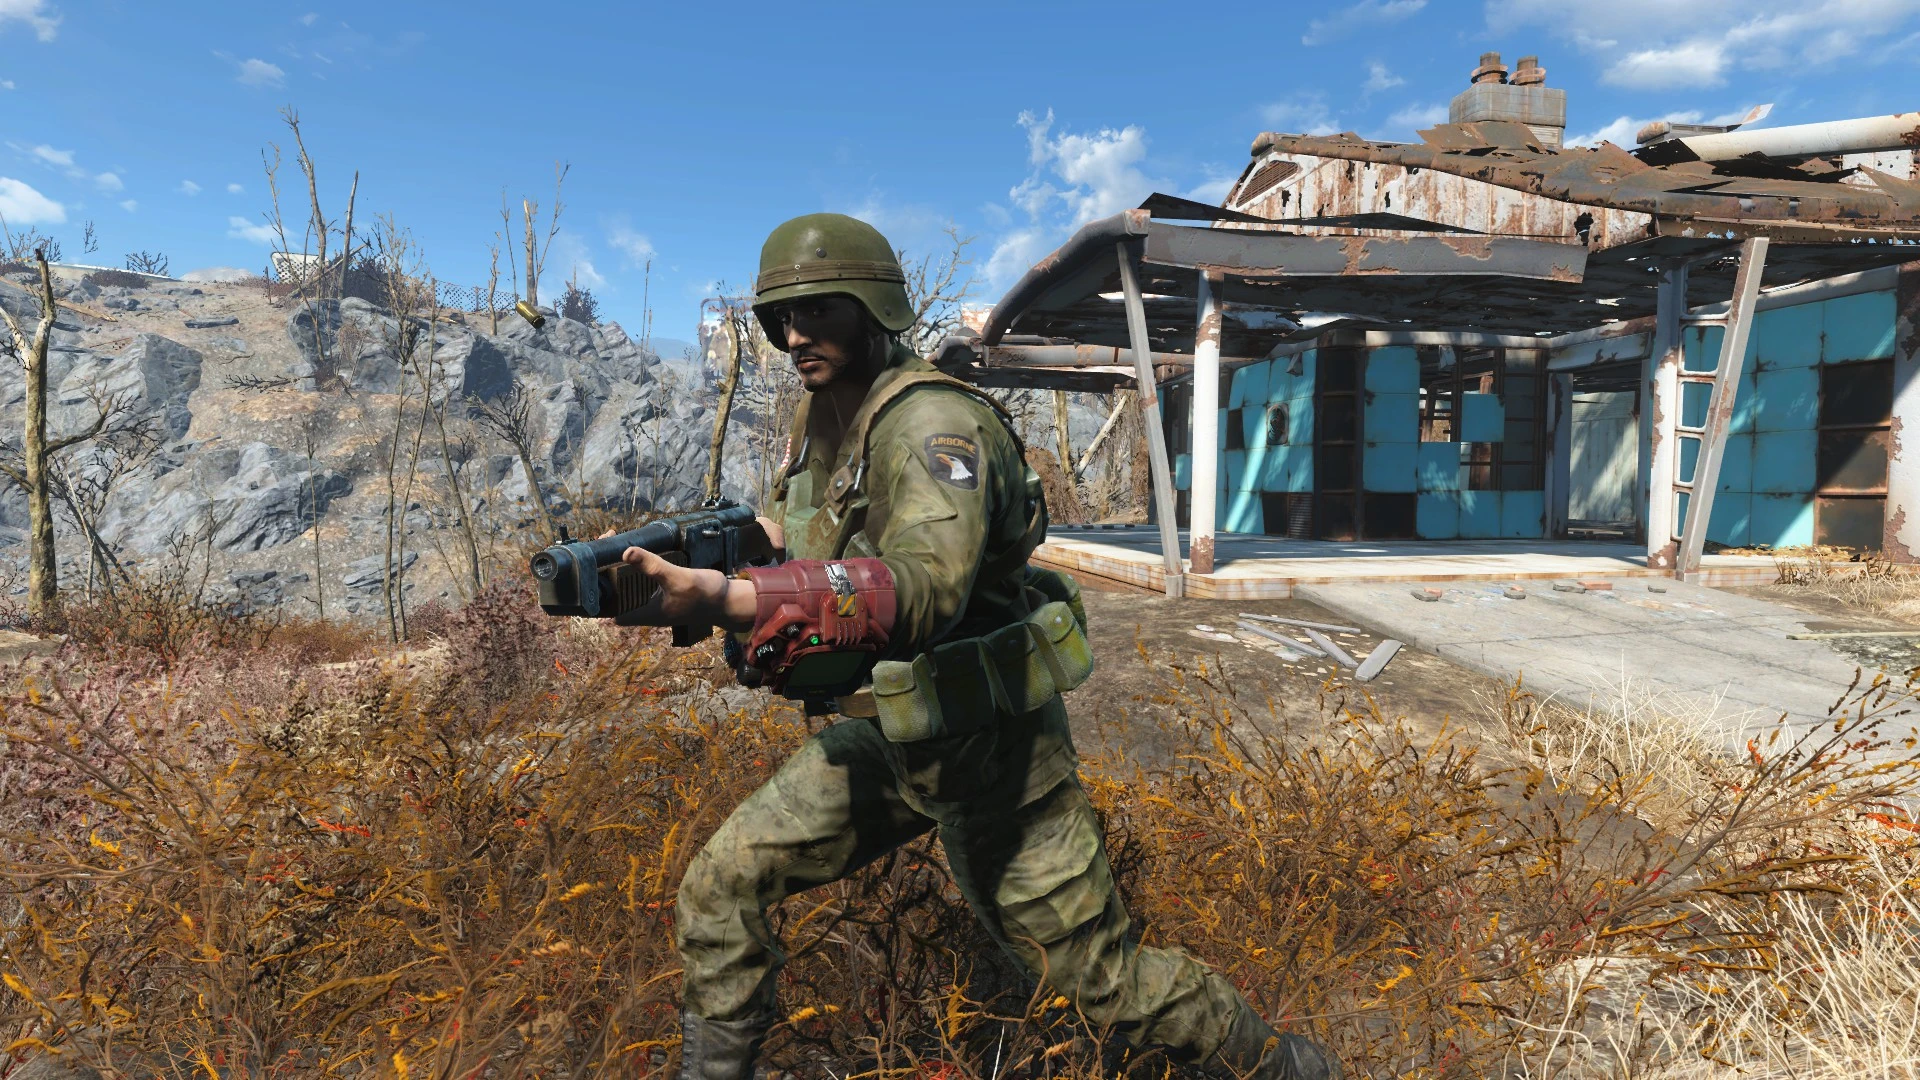 where to get army fatigues fallout 4